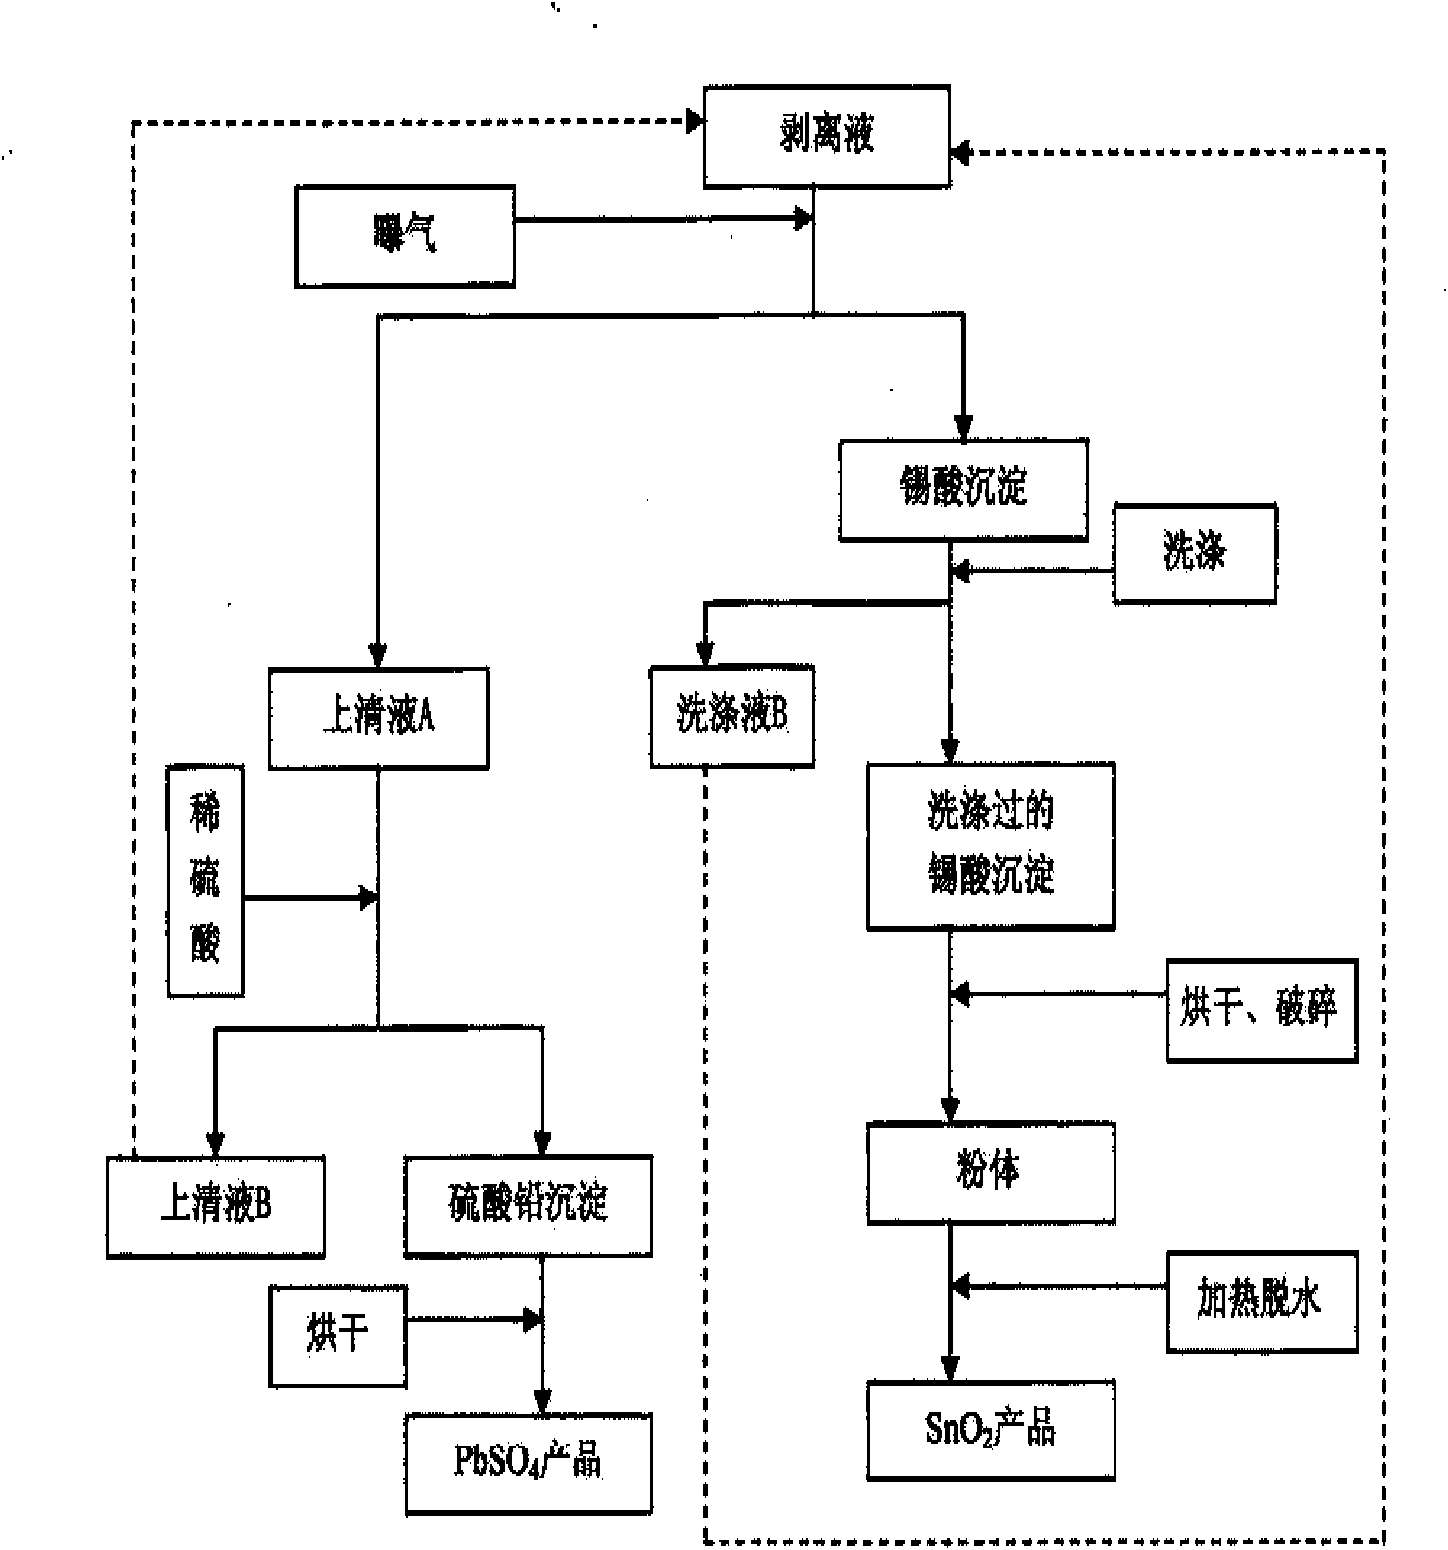 Tin-lead recovery method in waste circuit board